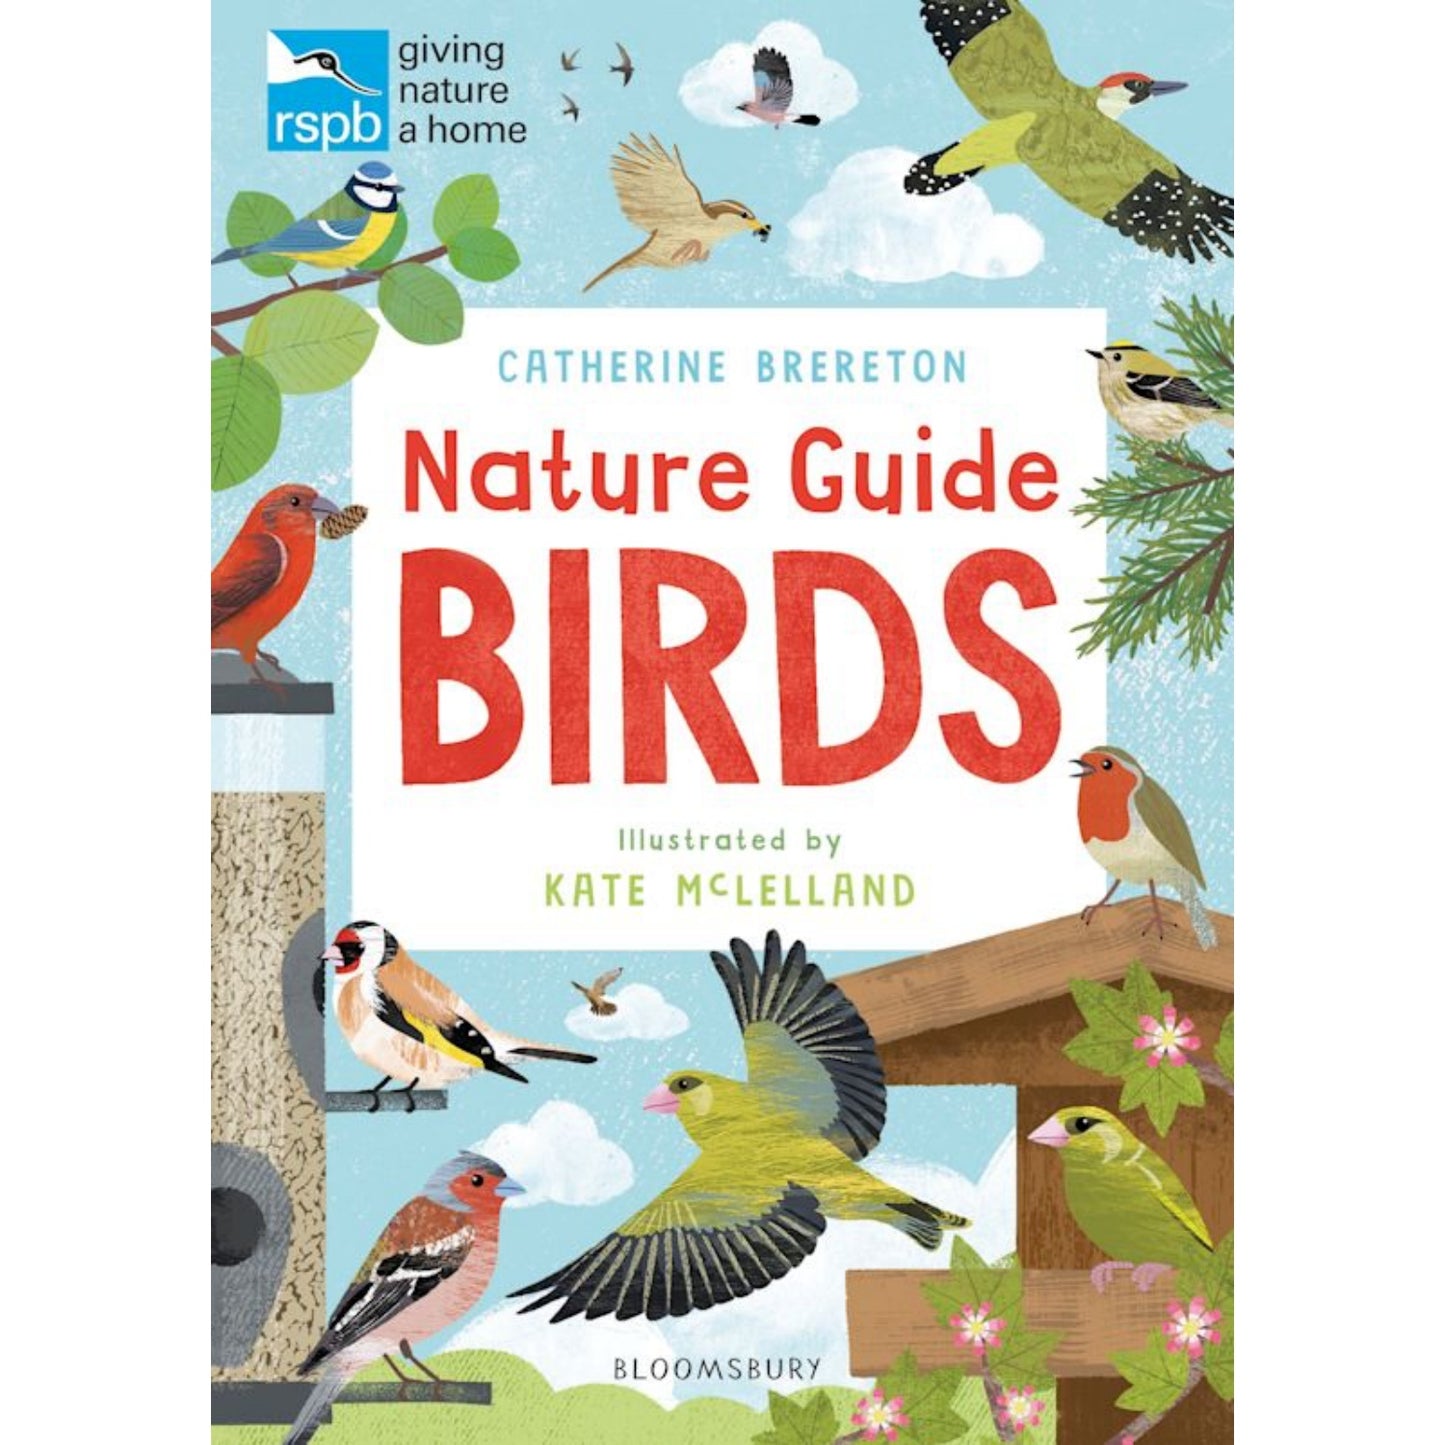 Birds - RSPB Nature Guide | Children's Book on Nature